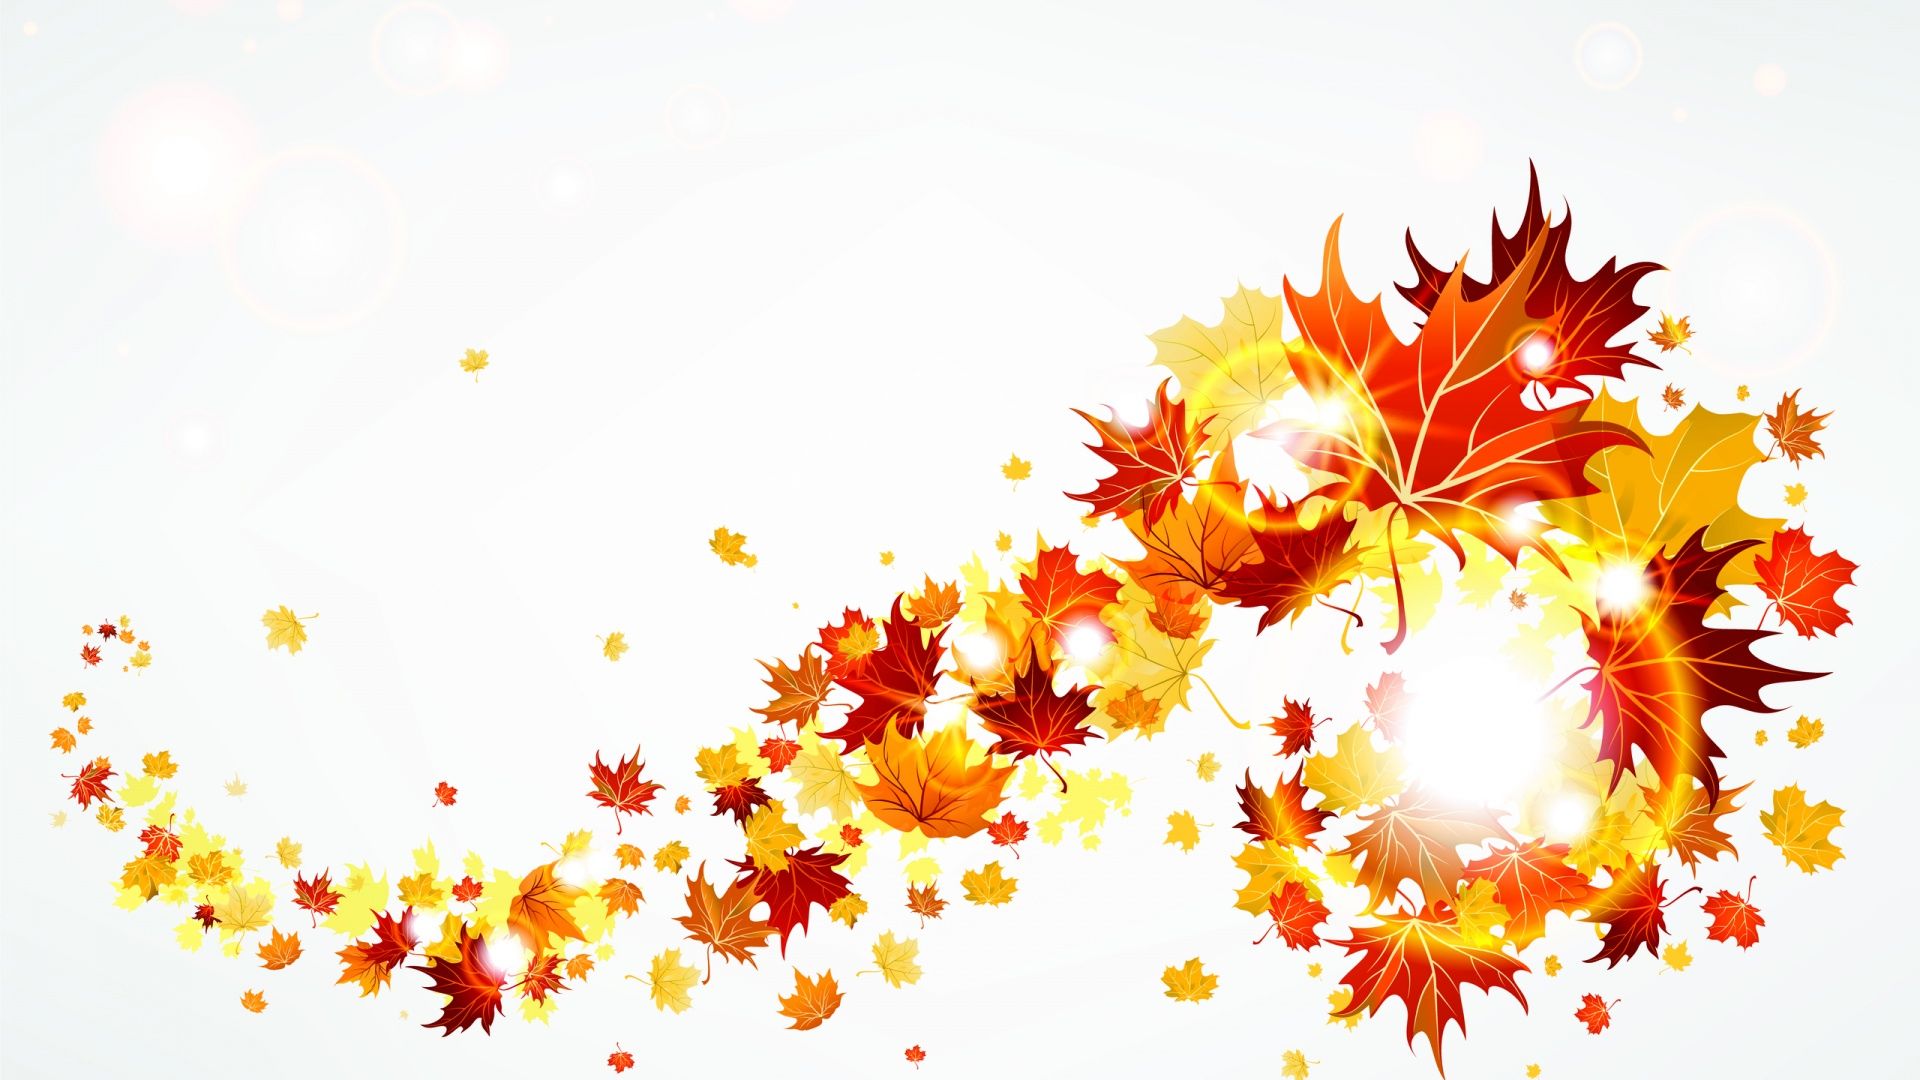 Fall border autumn fall leaves border clipart free clipart images 2 clipartcow